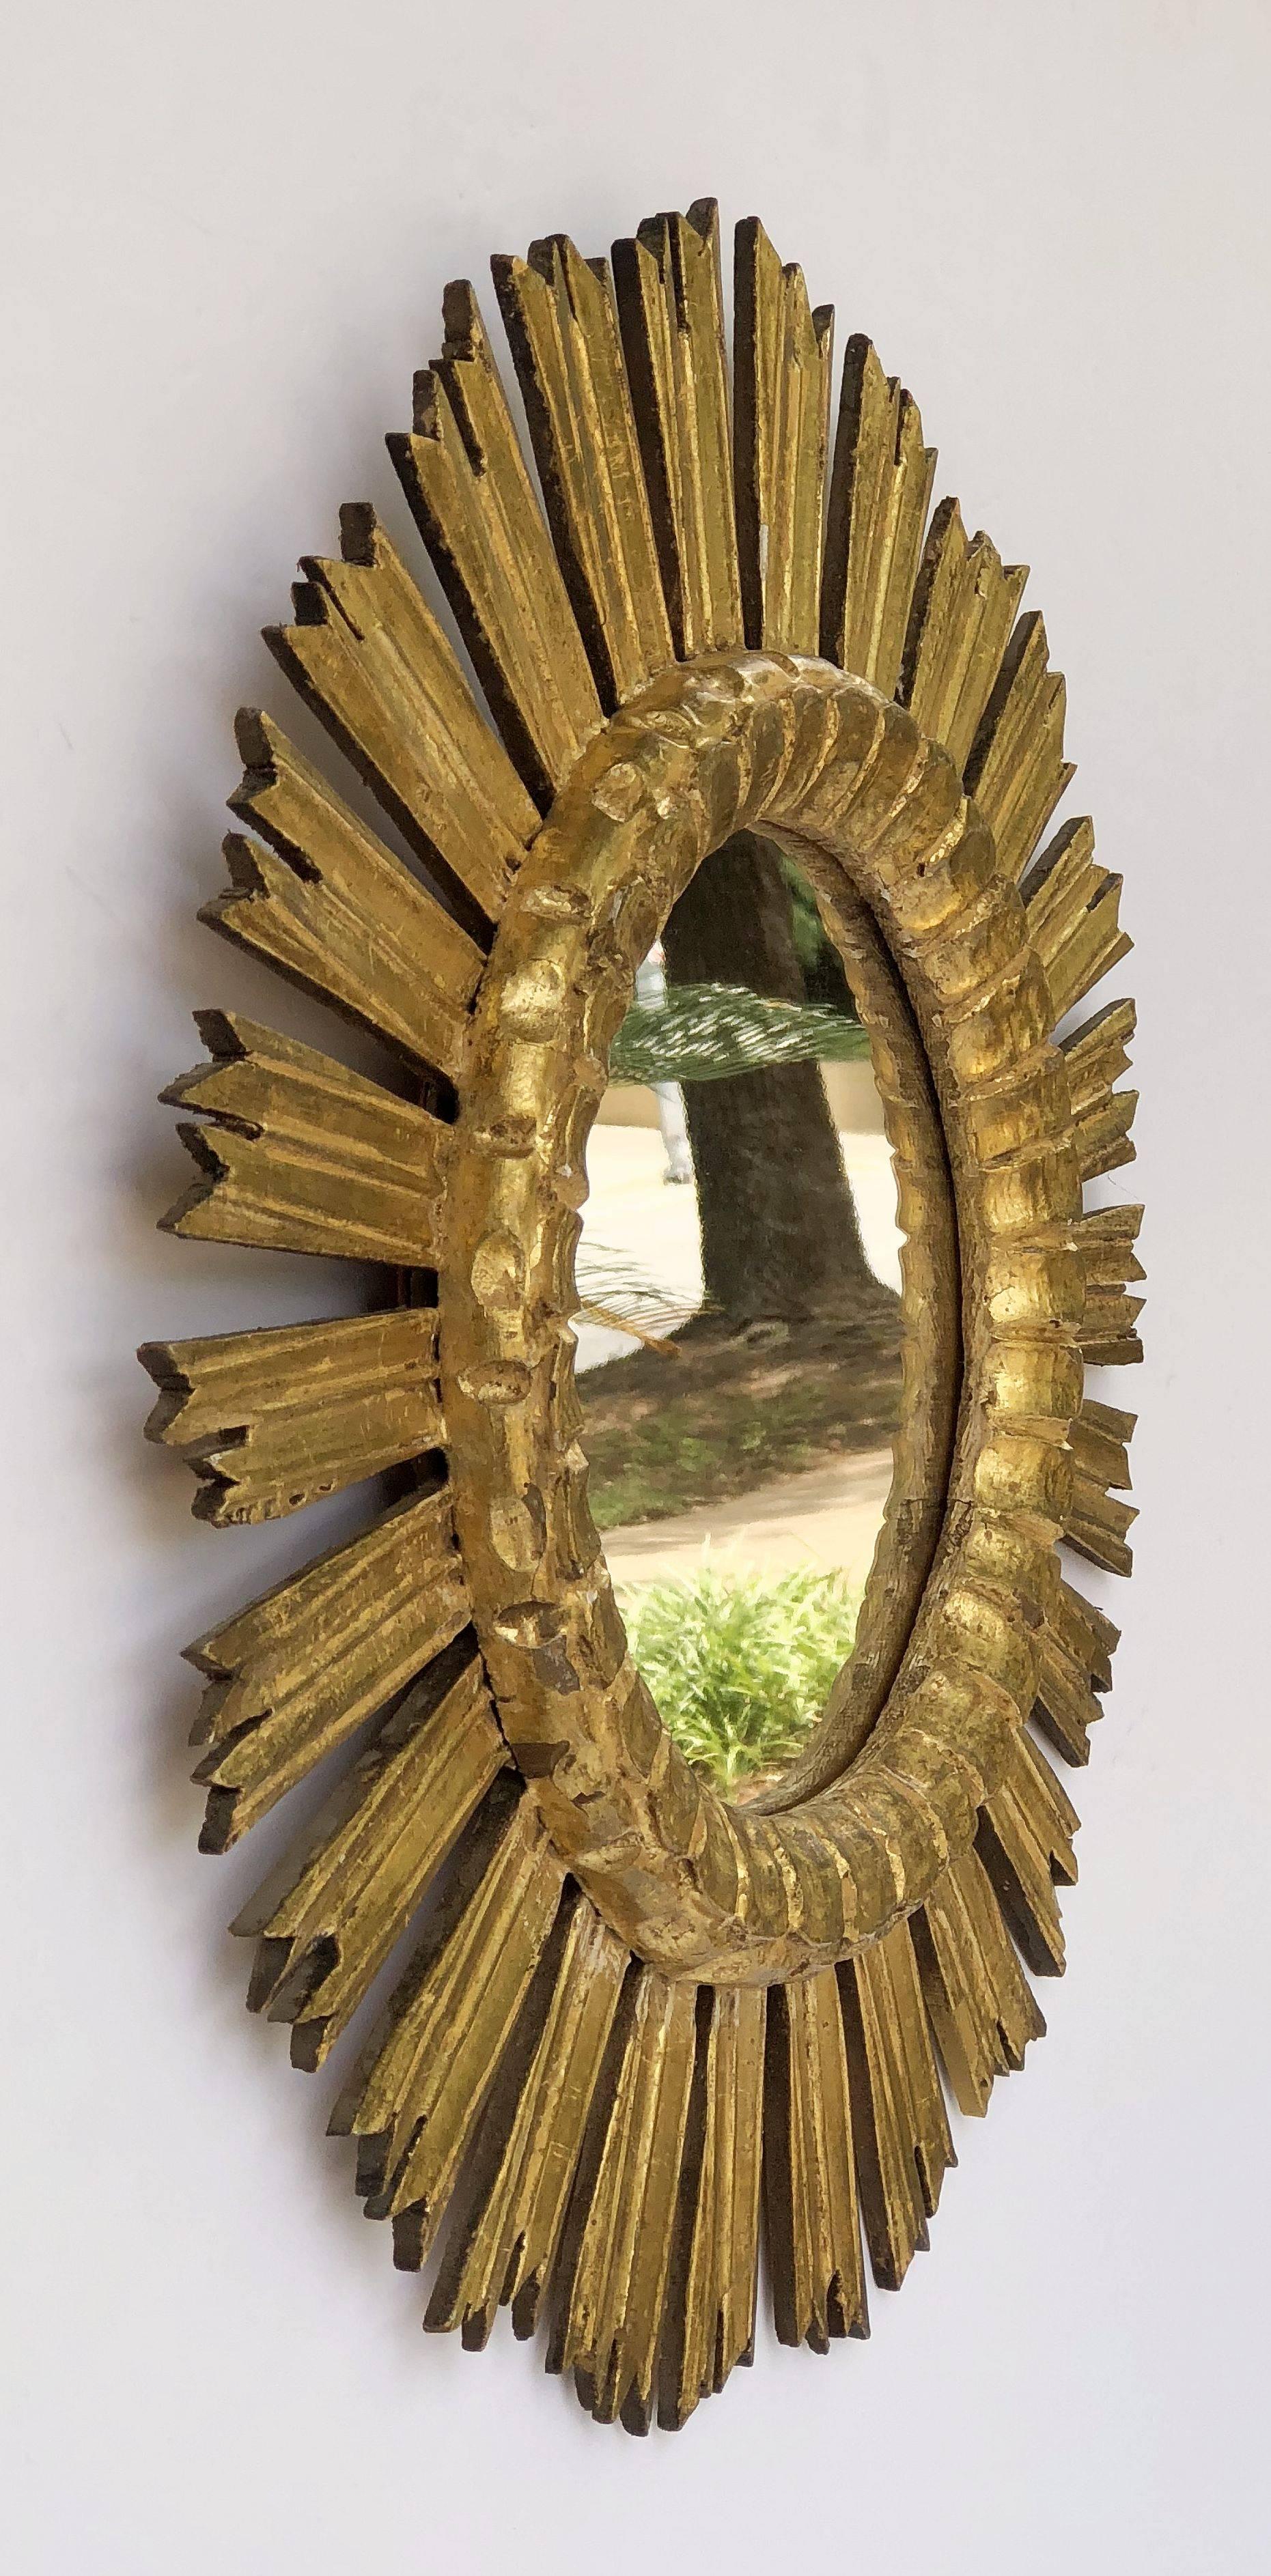 A lovely French gilt sunburst (or starburst) mirror, 21 inches diameter, with round mirrored glass centre in moulded frame.